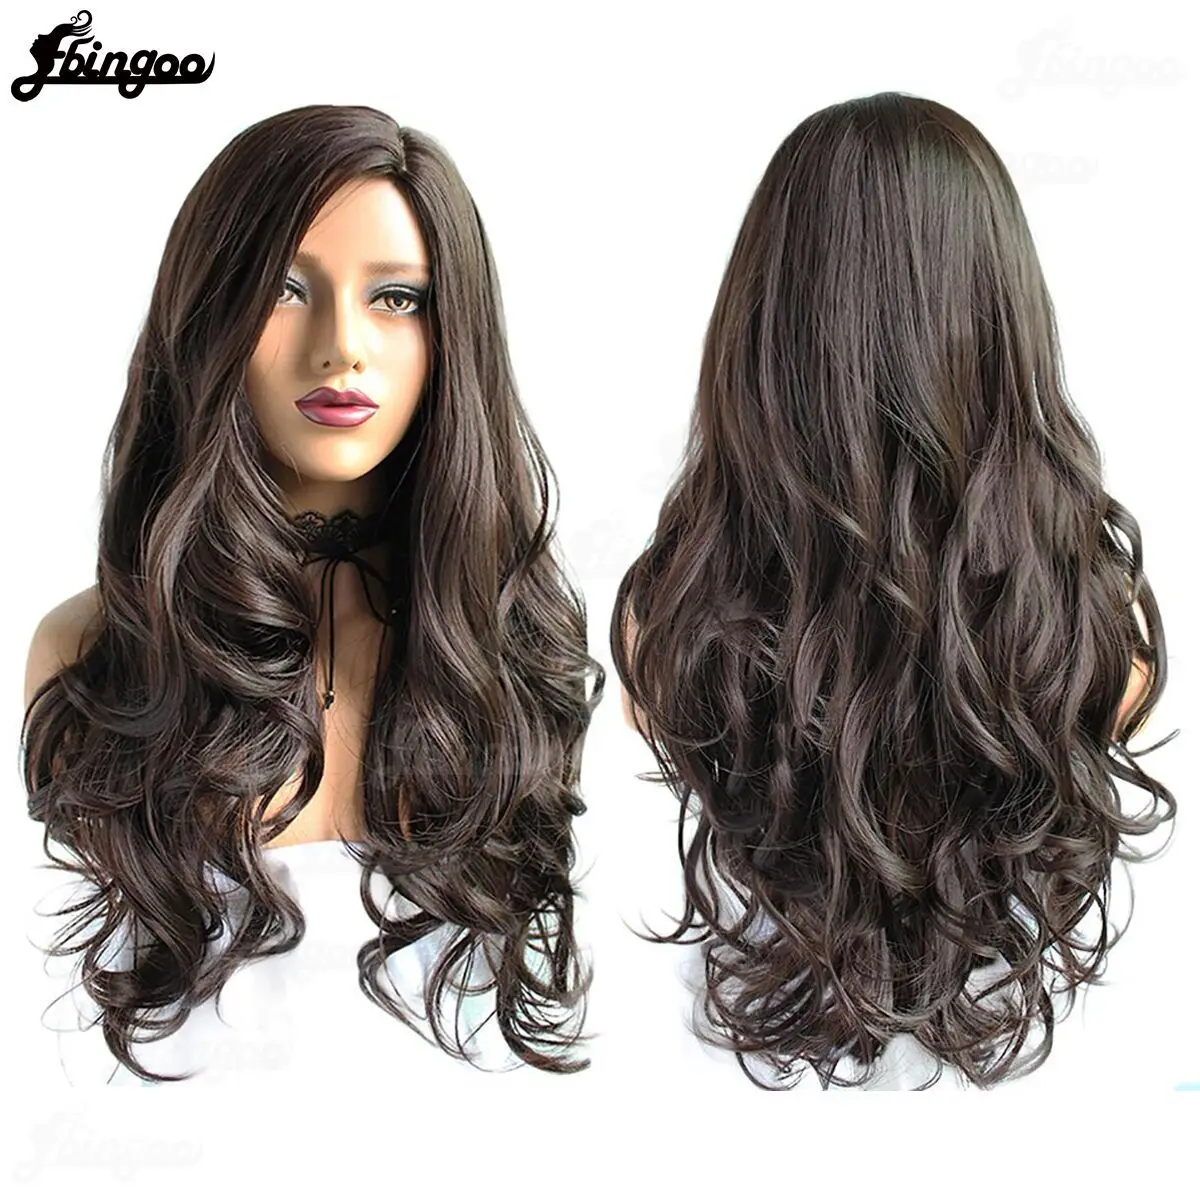 Ebingoo Synthetic Wig Side Part High Temperature Fiber Wig Long Body Wave Hair Wigs #2 Dark Brown Machine Made Wigs for Women